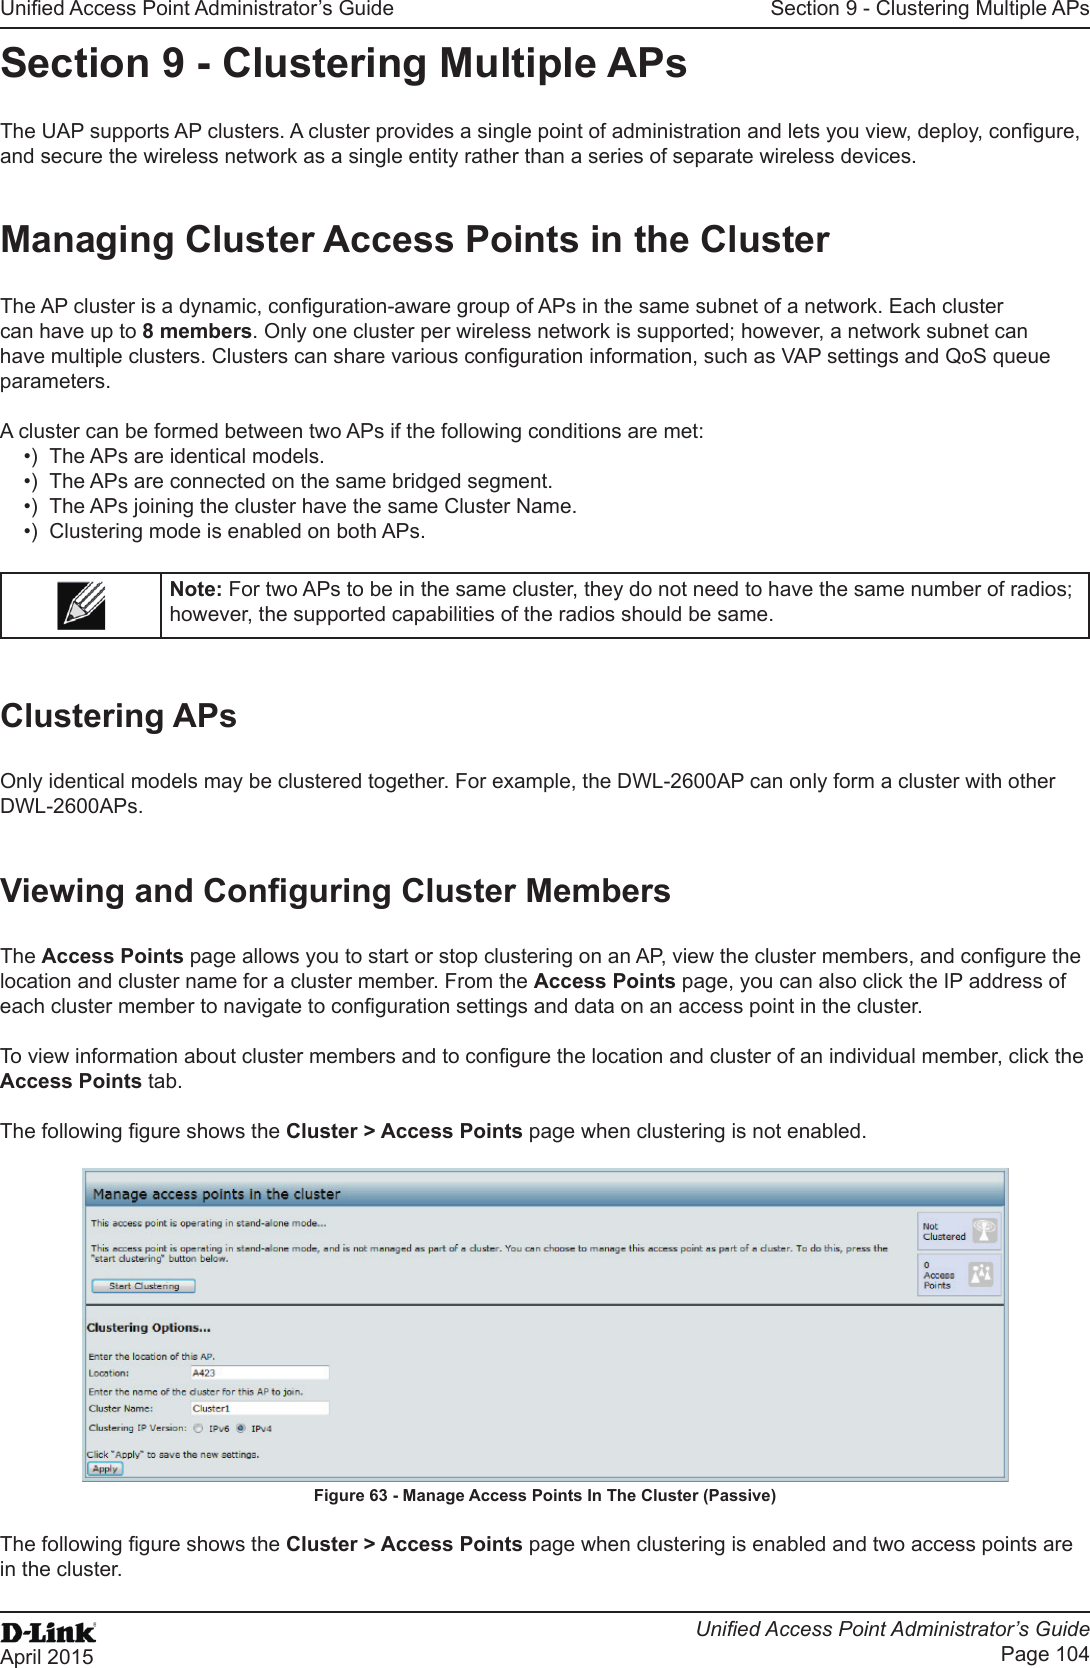 Unied Access Point Administrator’s GuideUnied Access Point Administrator’s GuidePage 104April 2015Section 9 - Clustering Multiple APsSection 9 - Clustering Multiple APsThe UAP supports AP clusters. A cluster provides a single point of administration and lets you view, deploy, congure, and secure the wireless network as a single entity rather than a series of separate wireless devices. Managing Cluster Access Points in the ClusterThe AP cluster is a dynamic, conguration-aware group of APs in the same subnet of a network. Each cluster can have up to 8 members. Only one cluster per wireless network is supported; however, a network subnet can have multiple clusters. Clusters can share various conguration information, such as VAP settings and QoS queue parameters.A cluster can be formed between two APs if the following conditions are met:•)  The APs are identical models.•)  The APs are connected on the same bridged segment.•)  The APs joining the cluster have the same Cluster Name.•)  Clustering mode is enabled on both APs.Note: For two APs to be in the same cluster, they do not need to have the same number of radios; however, the supported capabilities of the radios should be same.Clustering APsOnly identical models may be clustered together. For example, the DWL-2600AP can only form a cluster with other DWL-2600APs.Viewing and Conguring Cluster MembersThe Access Points page allows you to start or stop clustering on an AP, view the cluster members, and congure the location and cluster name for a cluster member. From the Access Points page, you can also click the IP address of each cluster member to navigate to conguration settings and data on an access point in the cluster. To view information about cluster members and to congure the location and cluster of an individual member, click the Access Points tab.The following gure shows the Cluster &gt; Access Points page when clustering is not enabled.Figure 63 - Manage Access Points In The Cluster (Passive)The following gure shows the Cluster &gt; Access Points page when clustering is enabled and two access points are in the cluster.